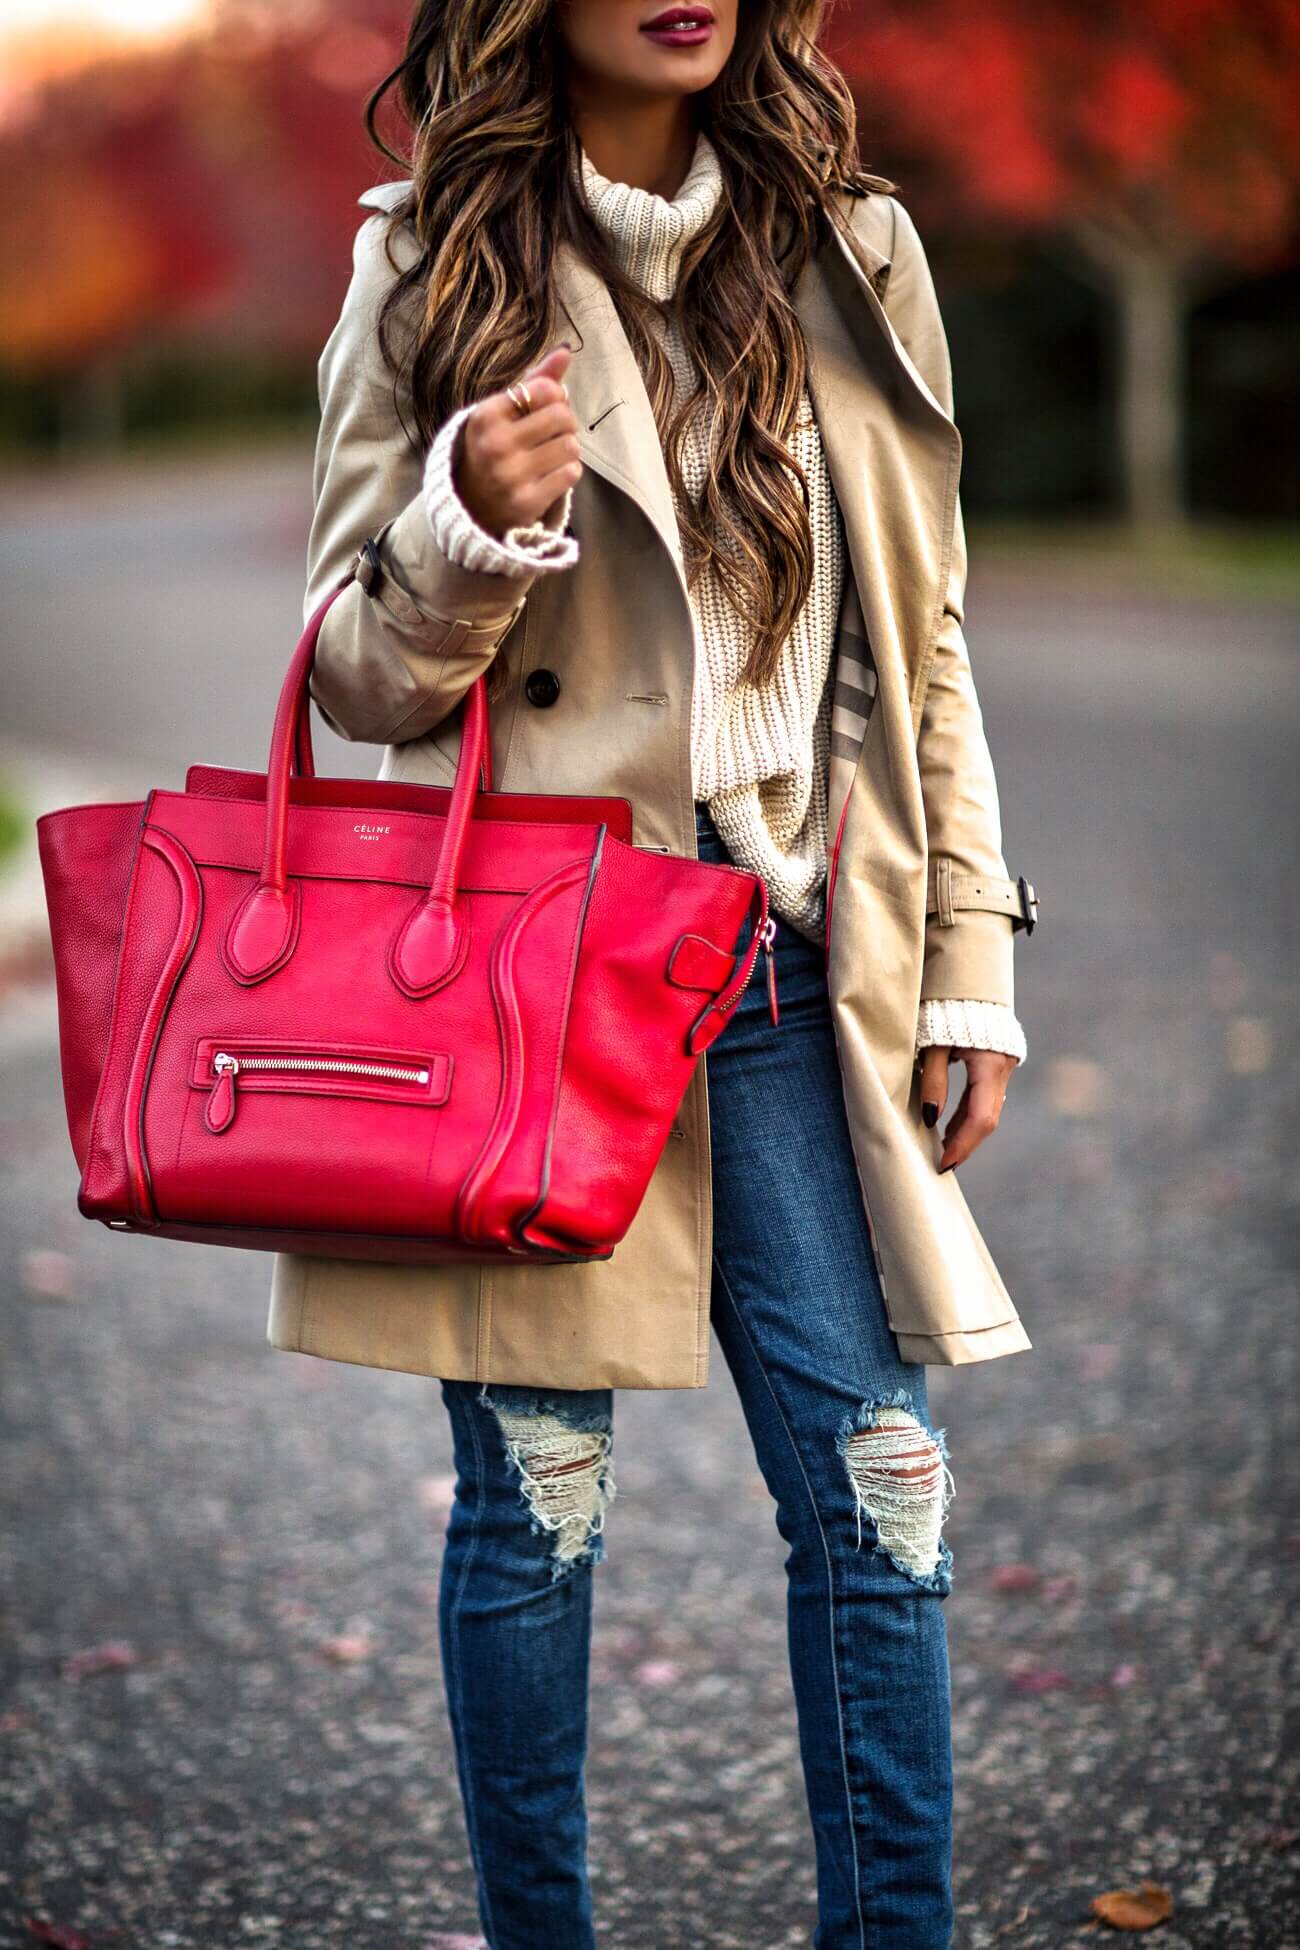 mia mia mine wearing a burberry trench coat and a red celine bag